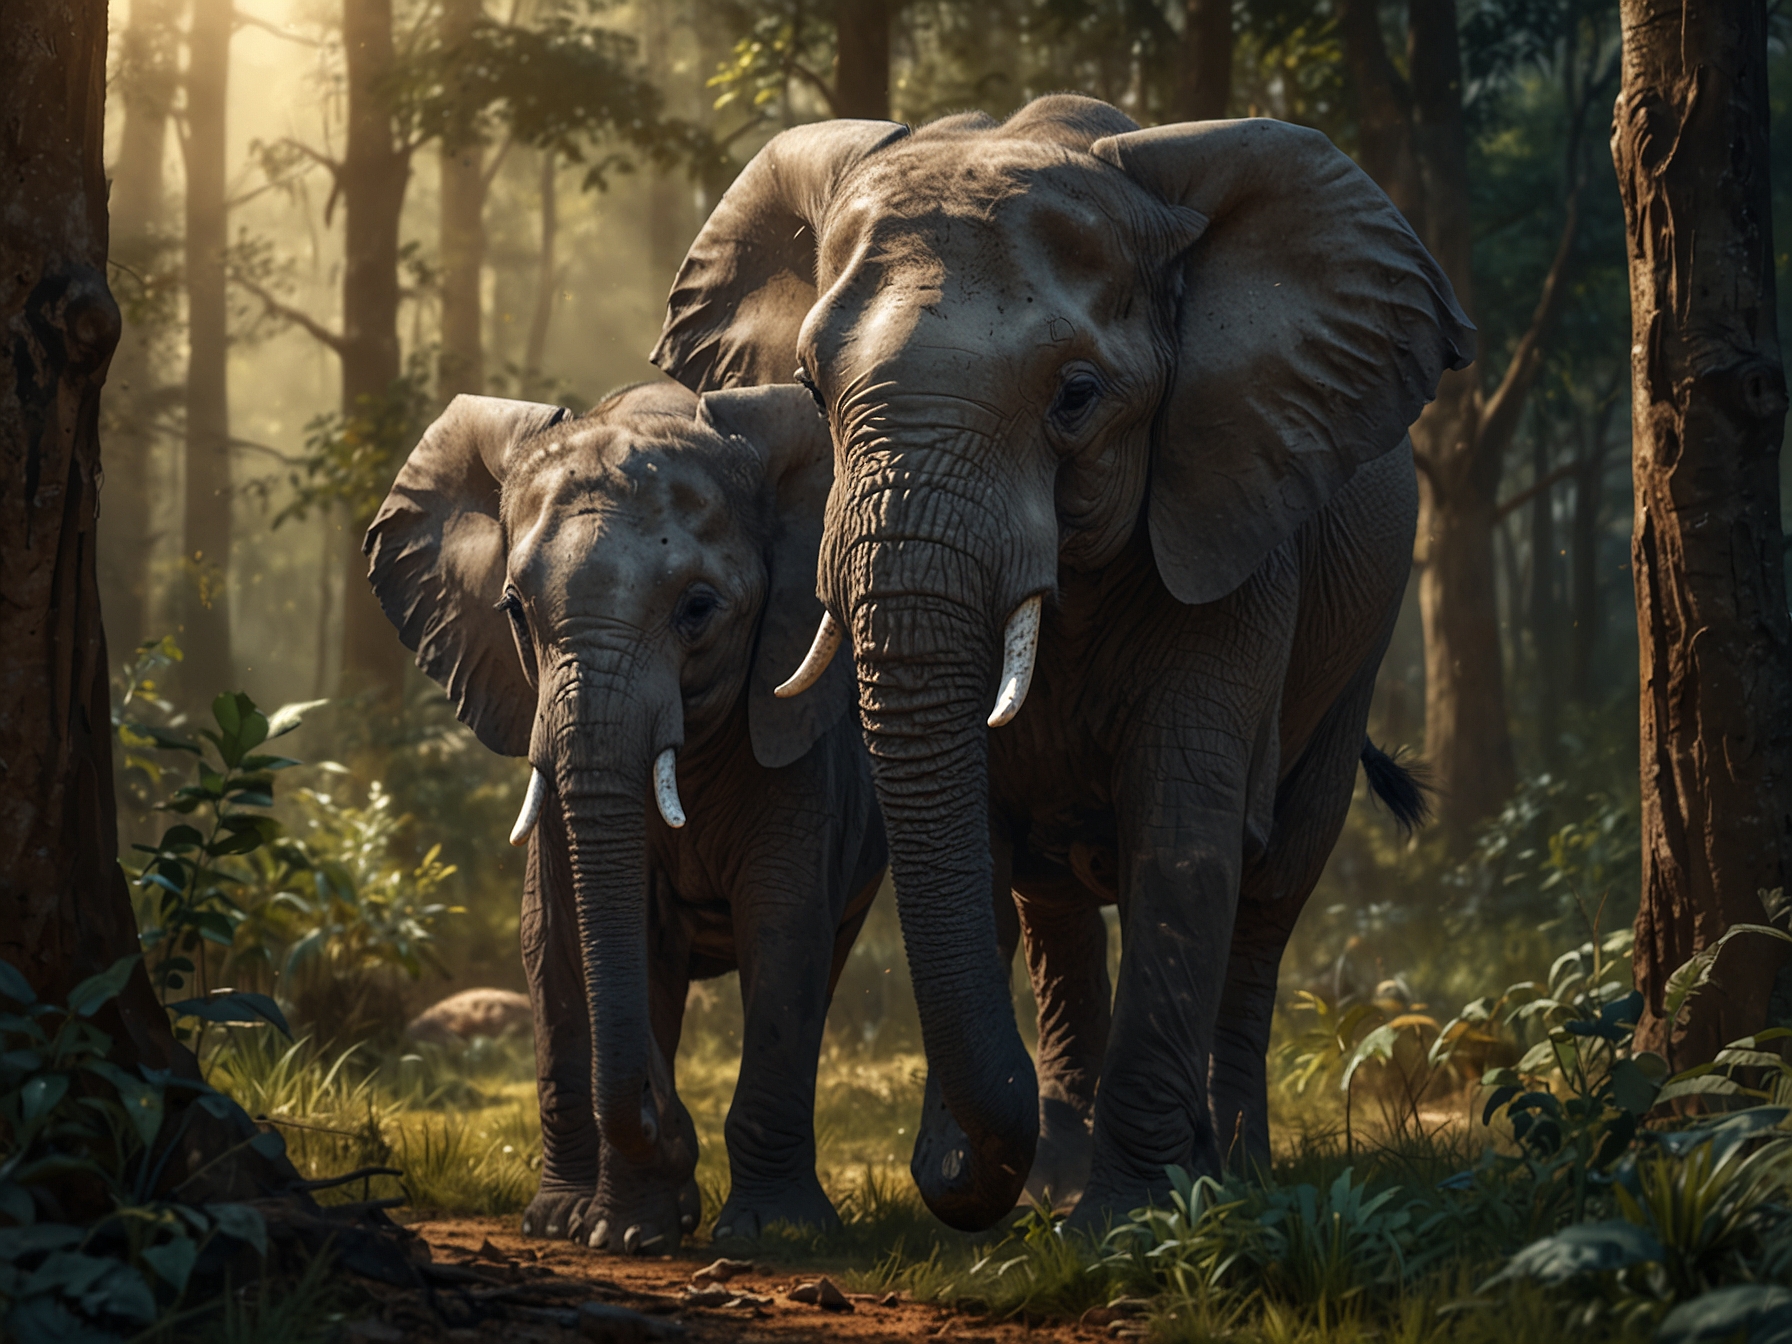 An elephant mother tenderly guiding her calf through a forest, exemplifying extended maternal care, which enhances the young one's survival and promotes lifelong health.